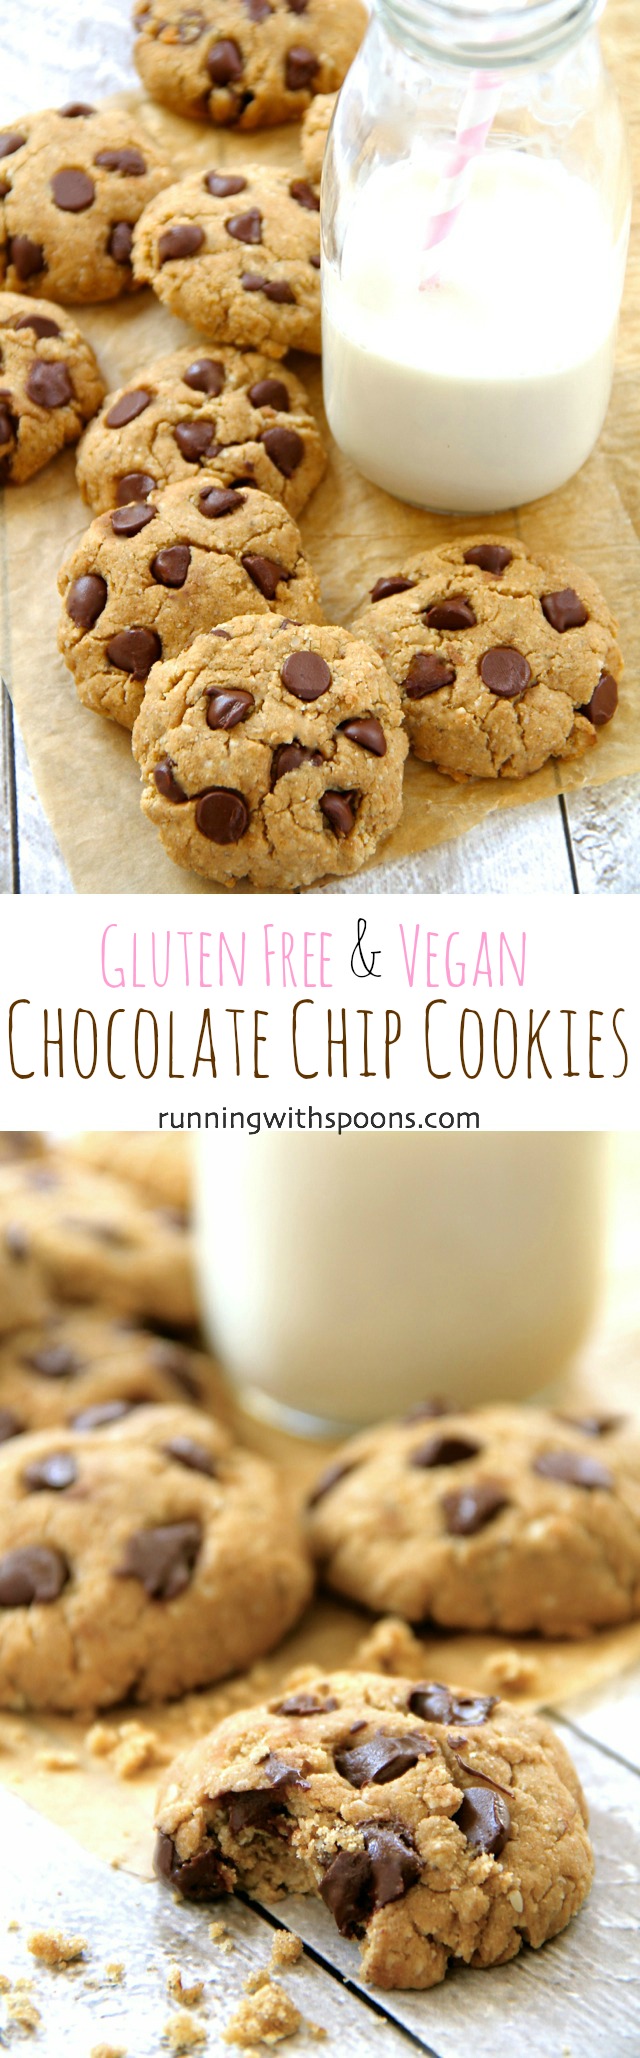 These delicious gluten free vegan chocolate chip cookies will please even gluten-eaters and non-vegans! Soft, chewy, and loaded with chocolate chips, they're a healthier cookie that everyone will love! 